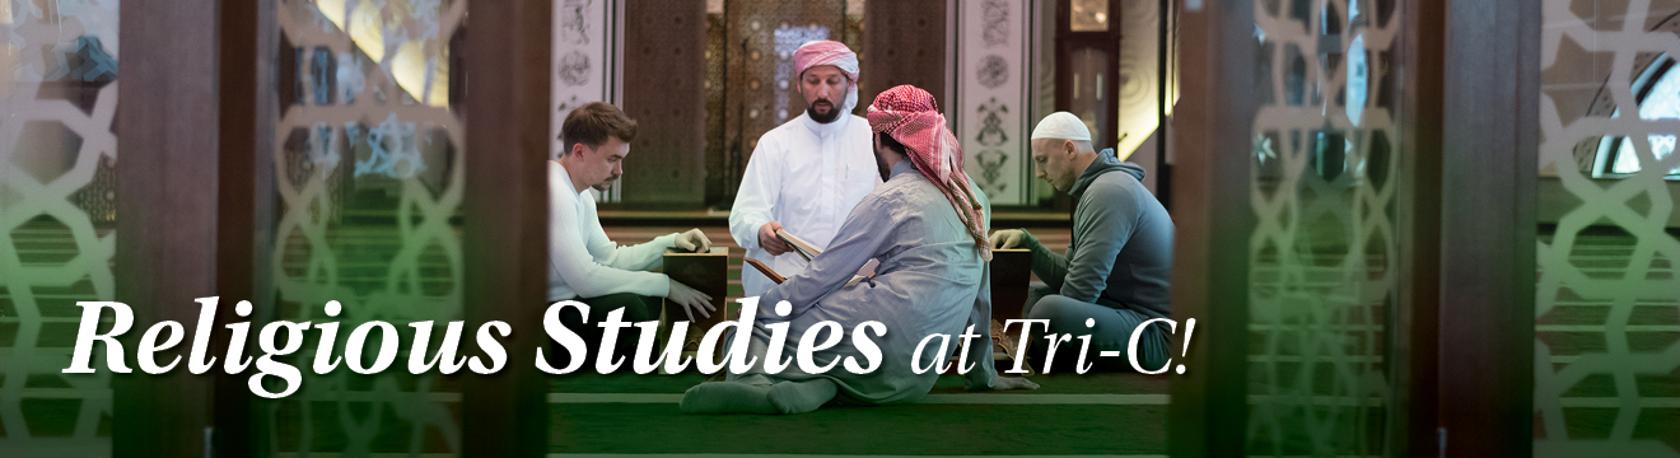 "Religious Studies at Tri-C!" with image of people practicing faith.